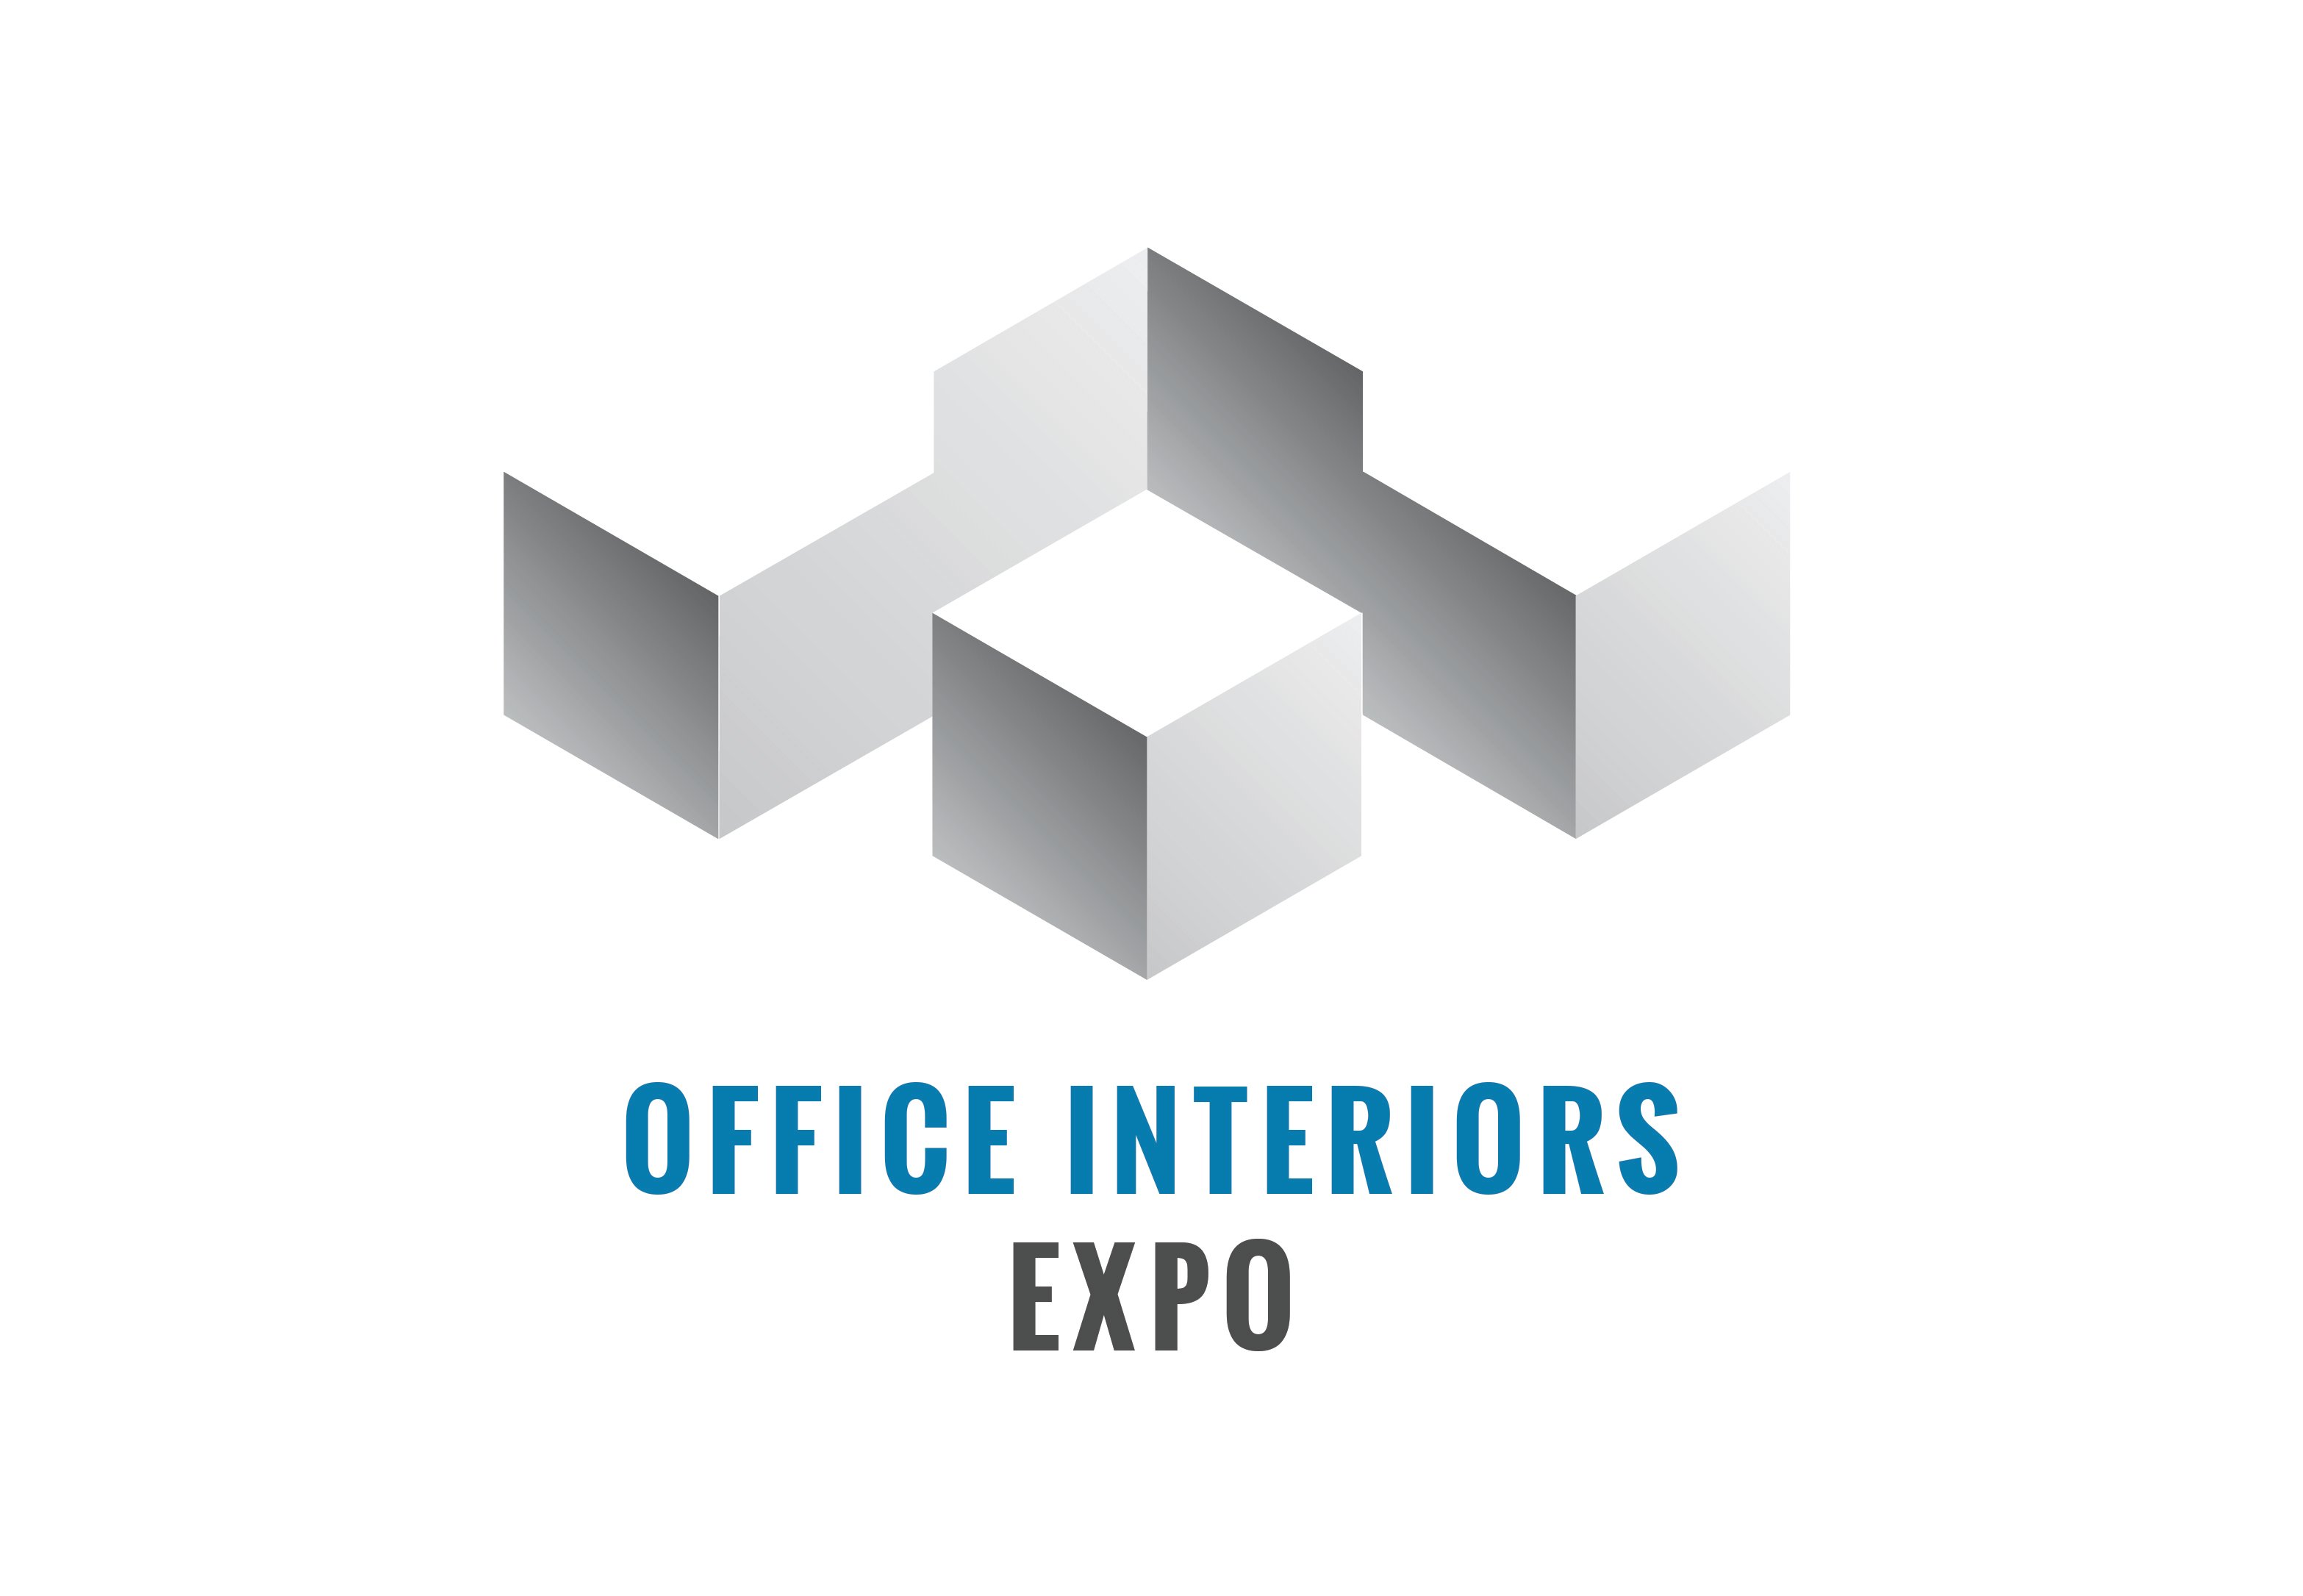 The Office Interiors Expo
25th-26th March 2020
Business Design Centre, London
#OIExpo2020